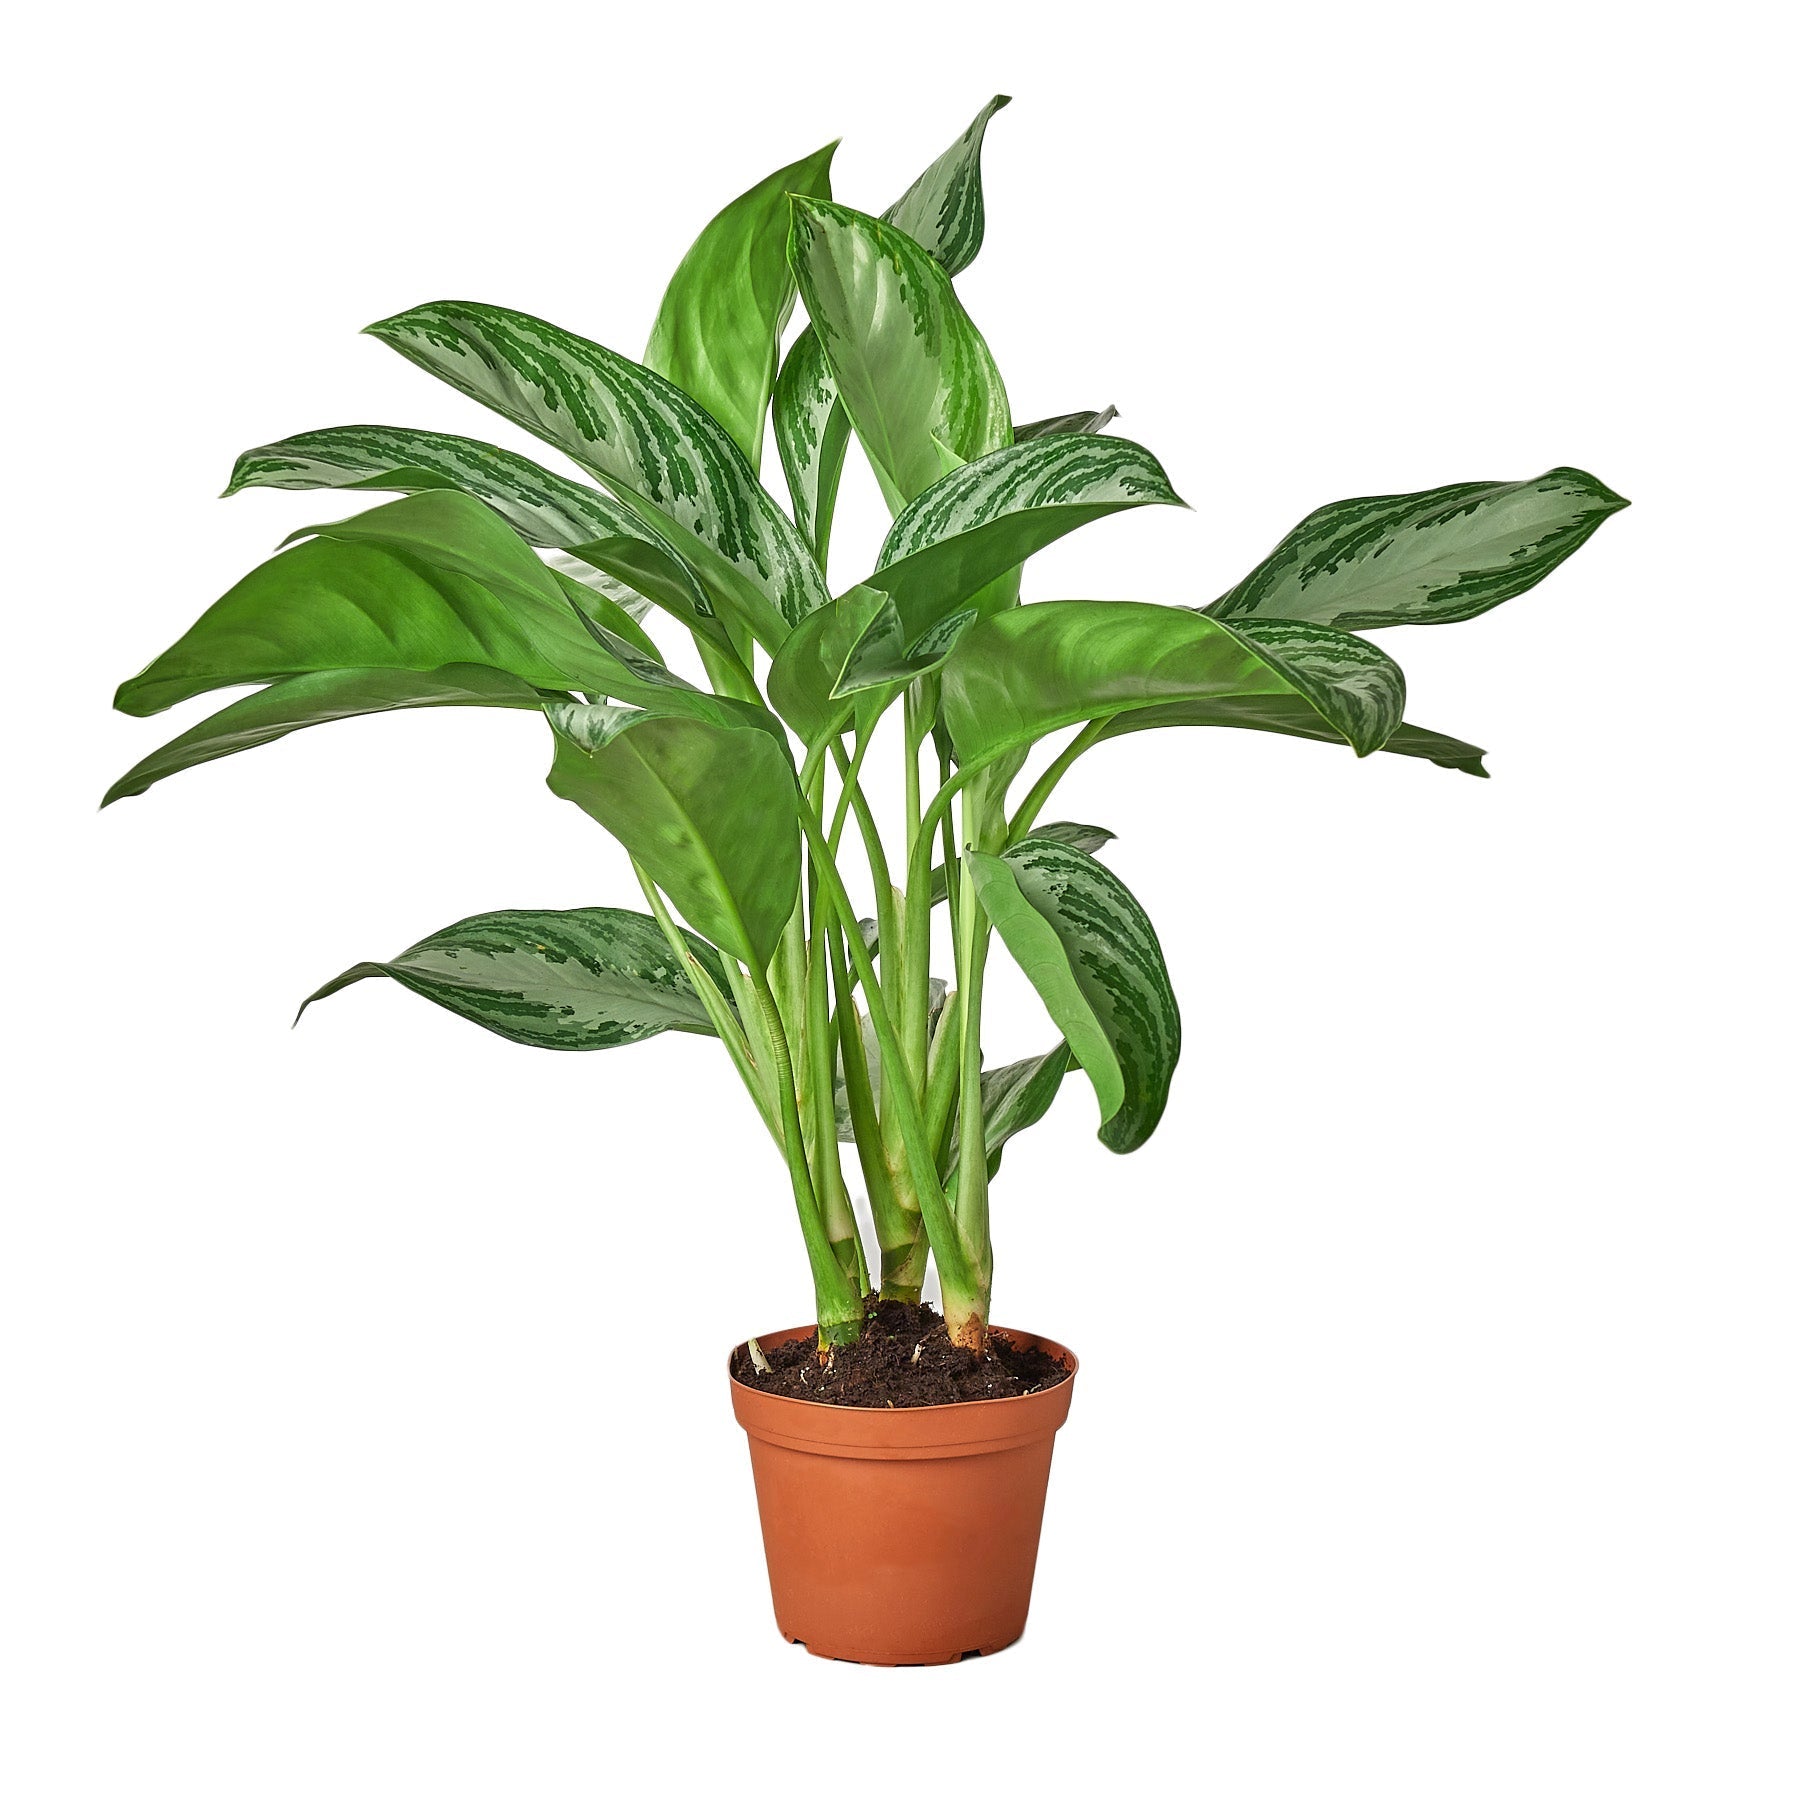 A potted plant with green leaves on a white background, perfect for those searching for top plant nurseries near me.